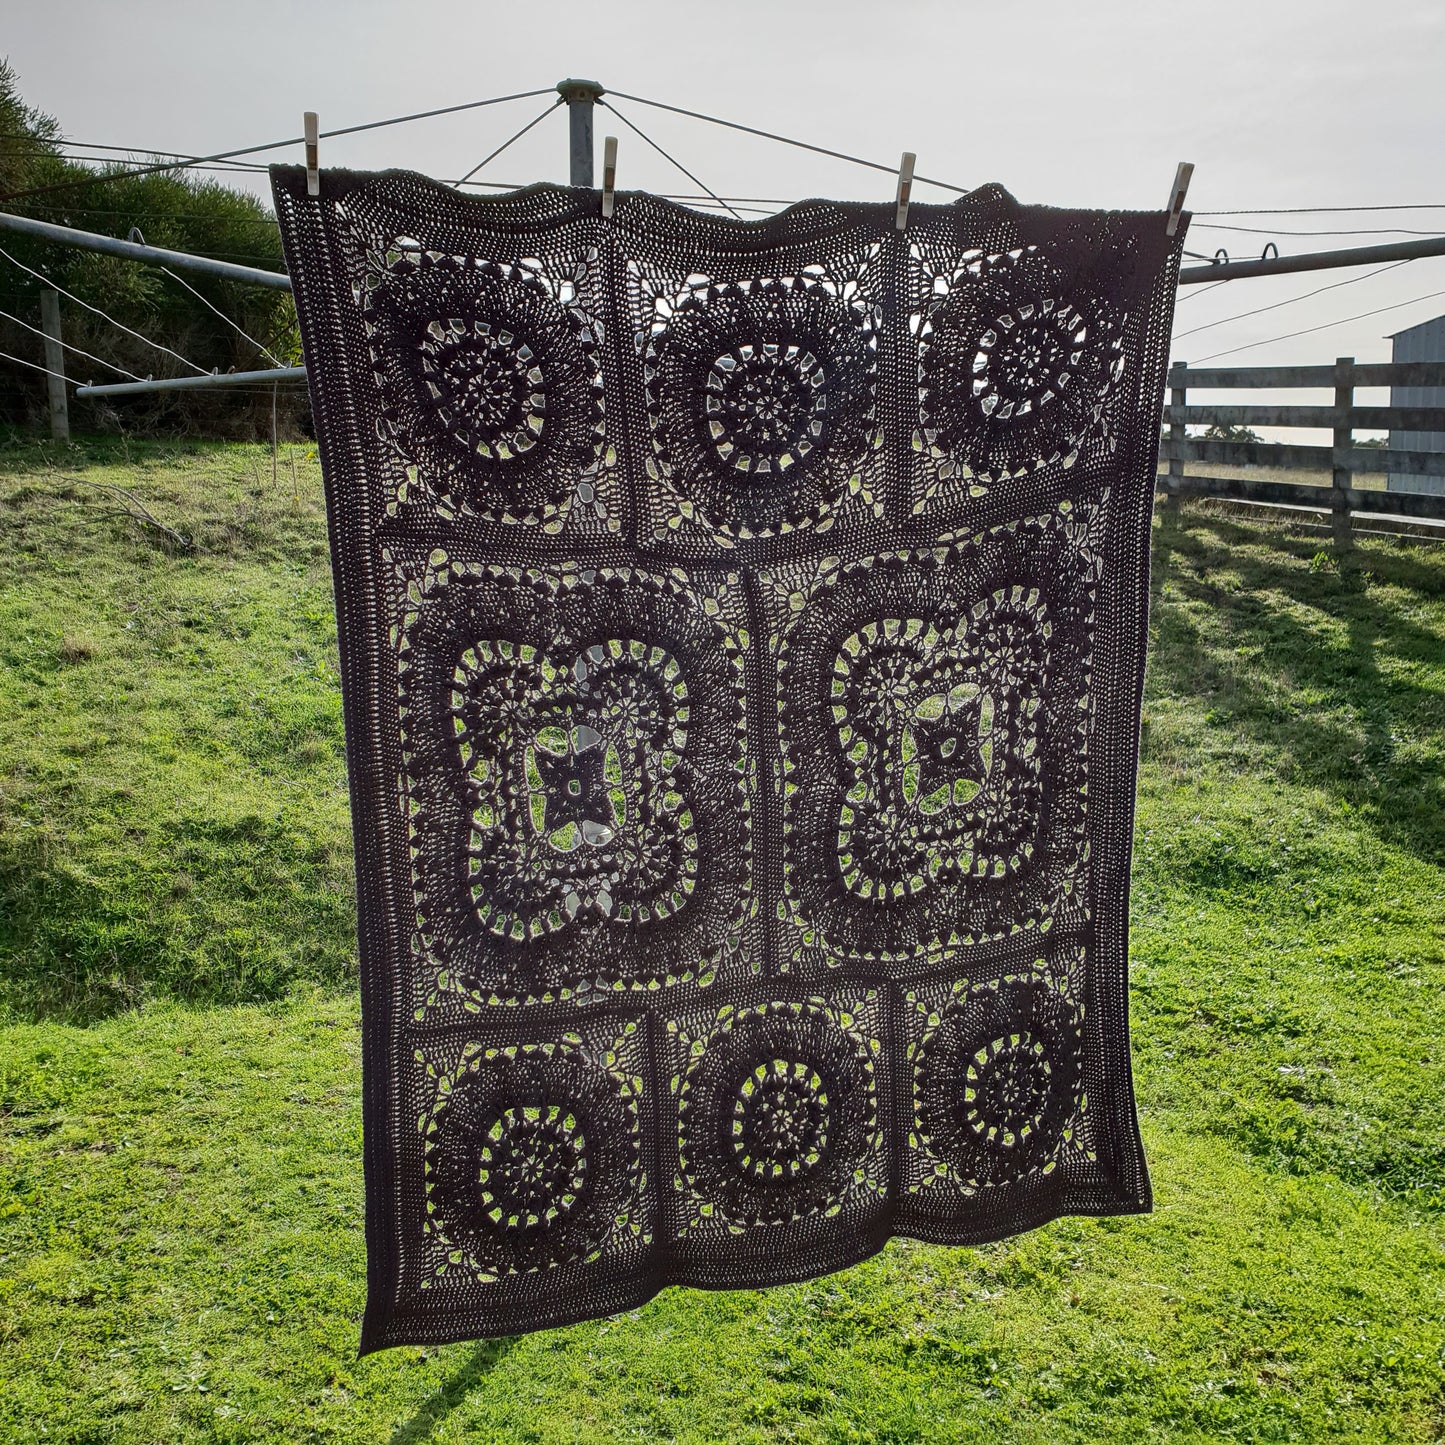 Giantess Blanket Pattern by Shelley Husband on clothes line